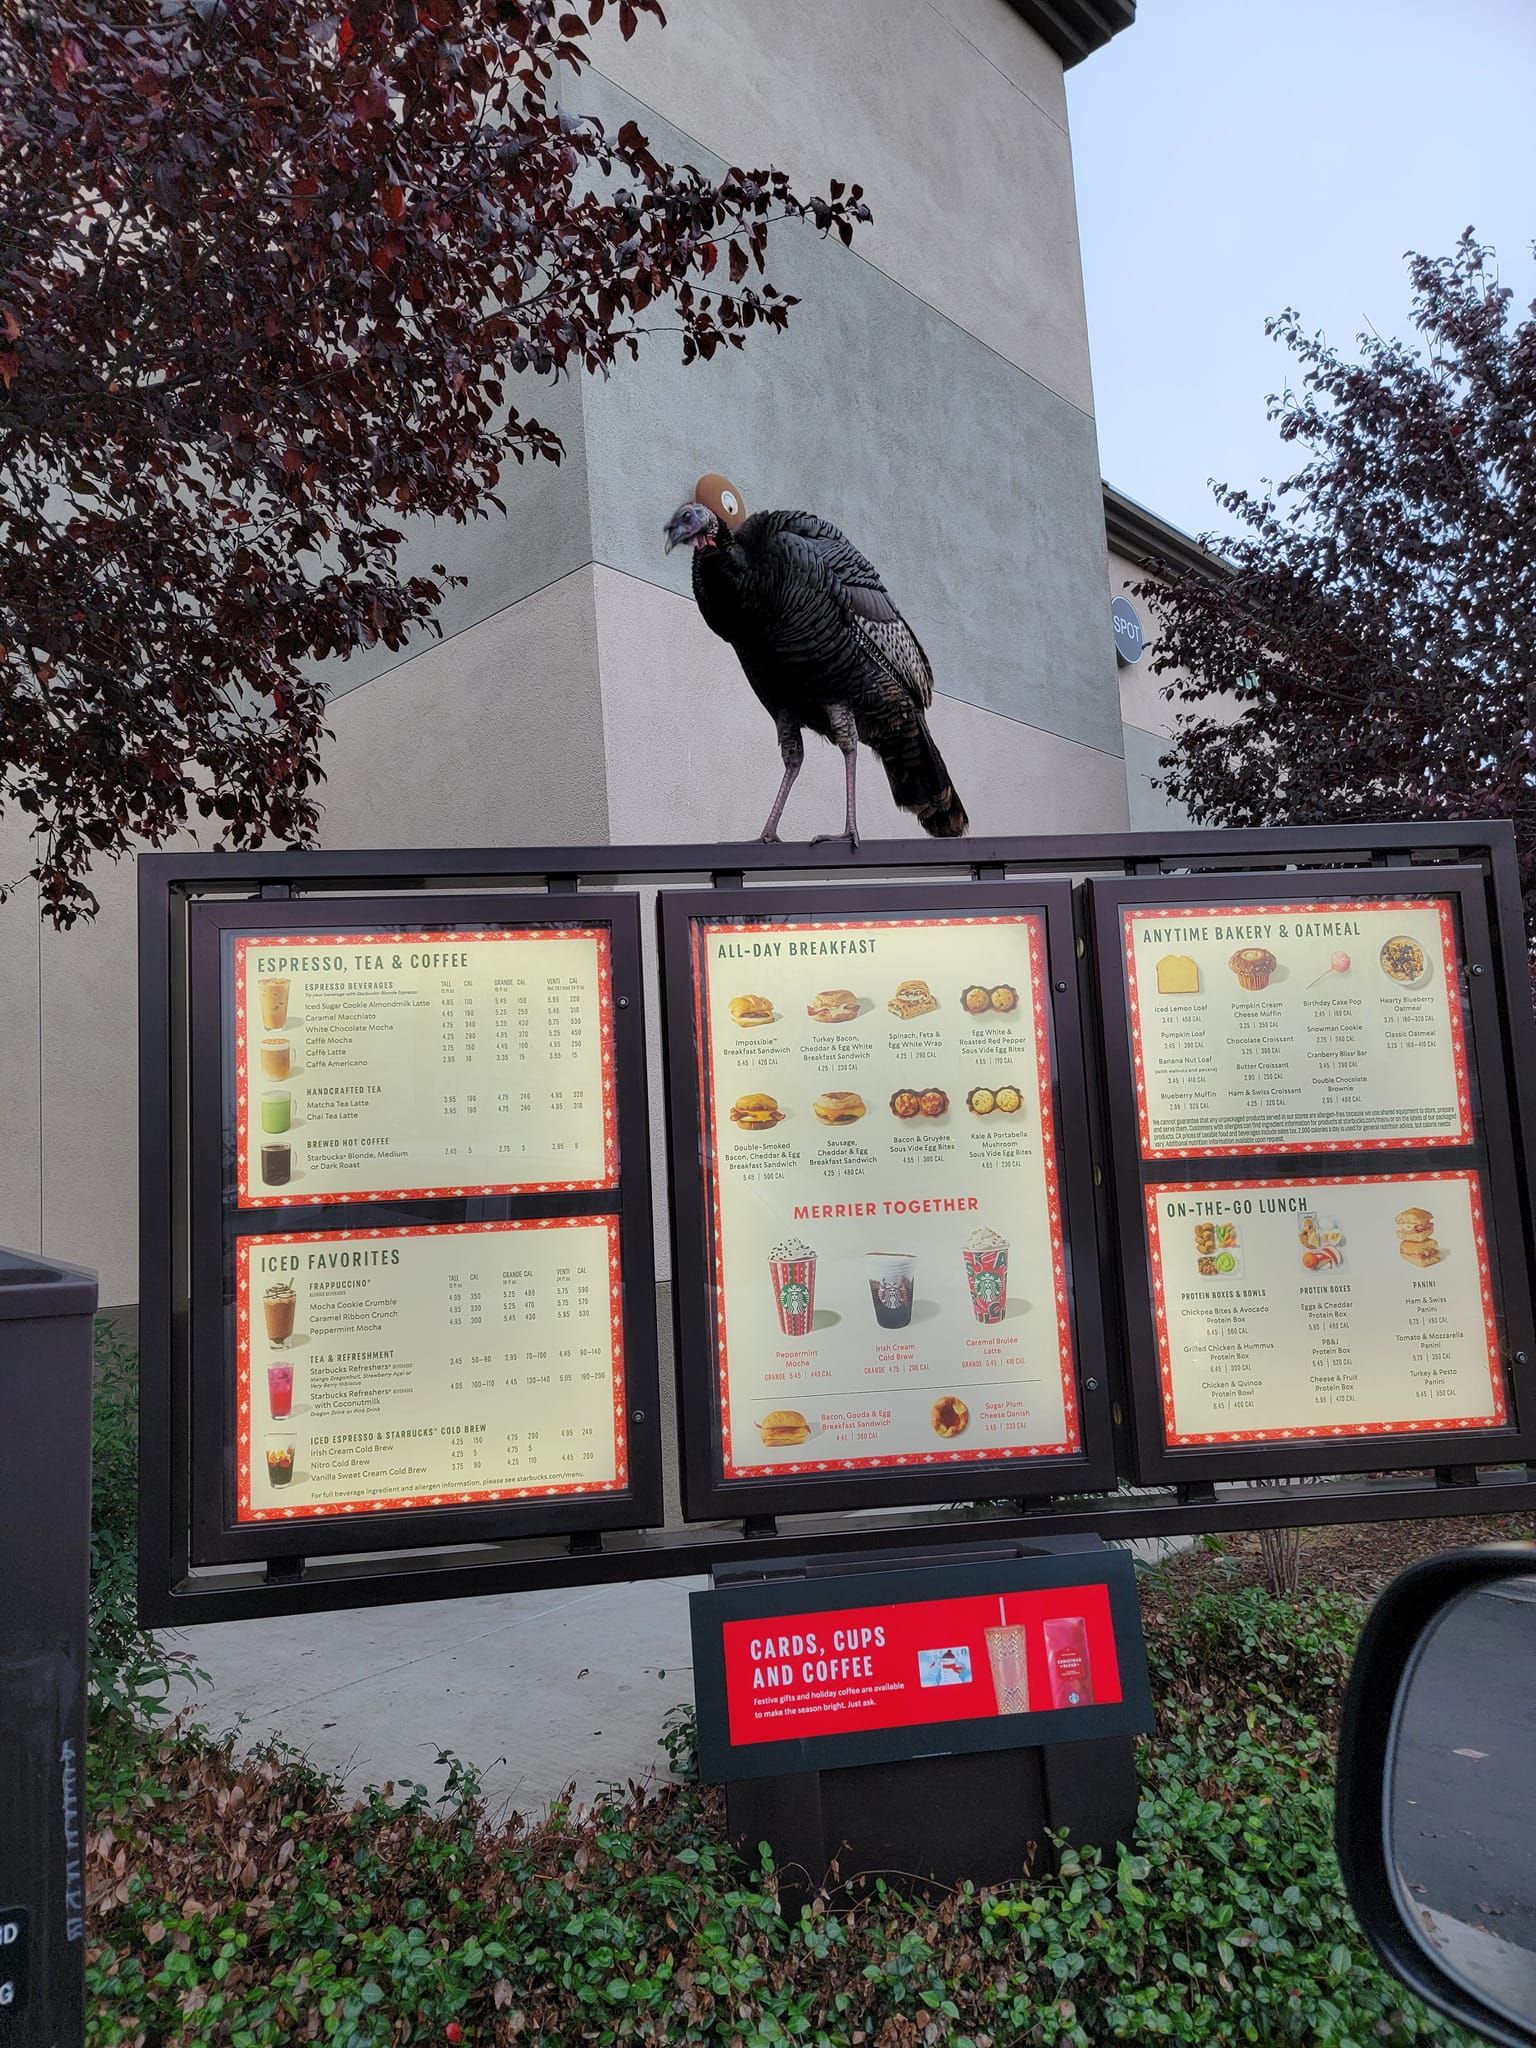 Went to get Starbucks this morning and saw that they had turkey on the menu.